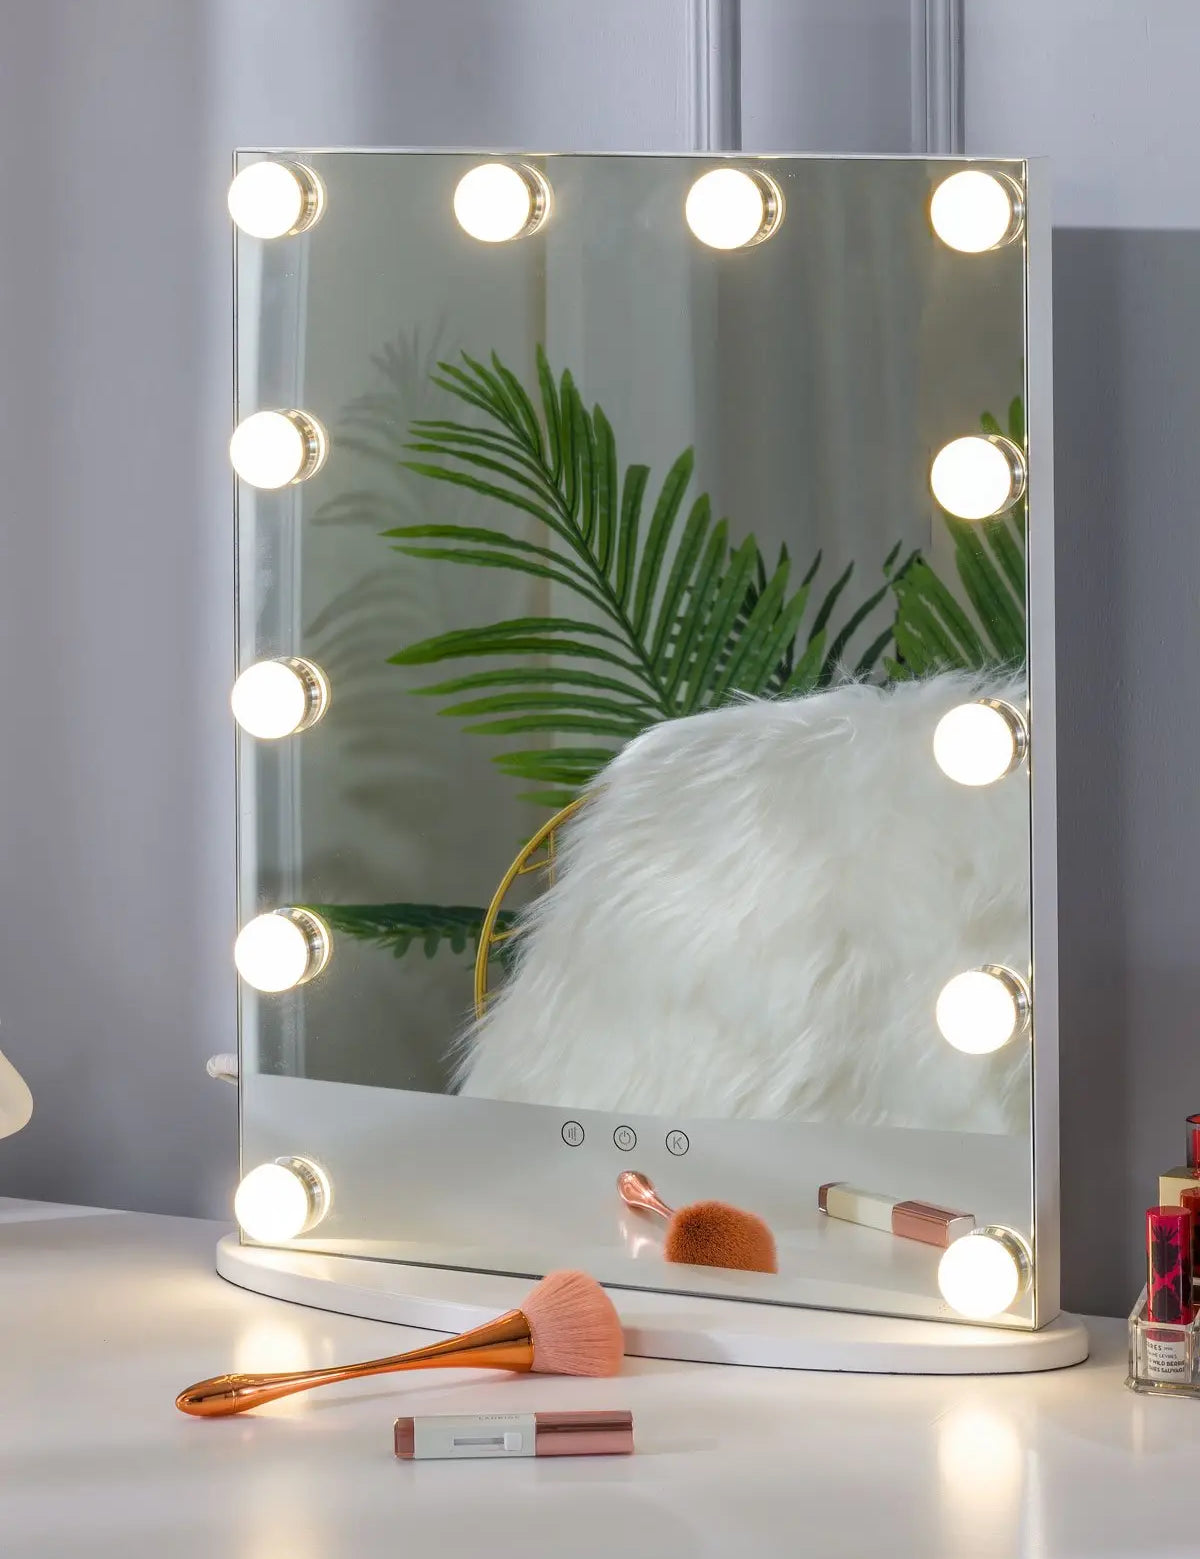 Luxfurni | Hollywood Mirror | Professional Hollywood Starry 7 LED Vanity Mirror - White